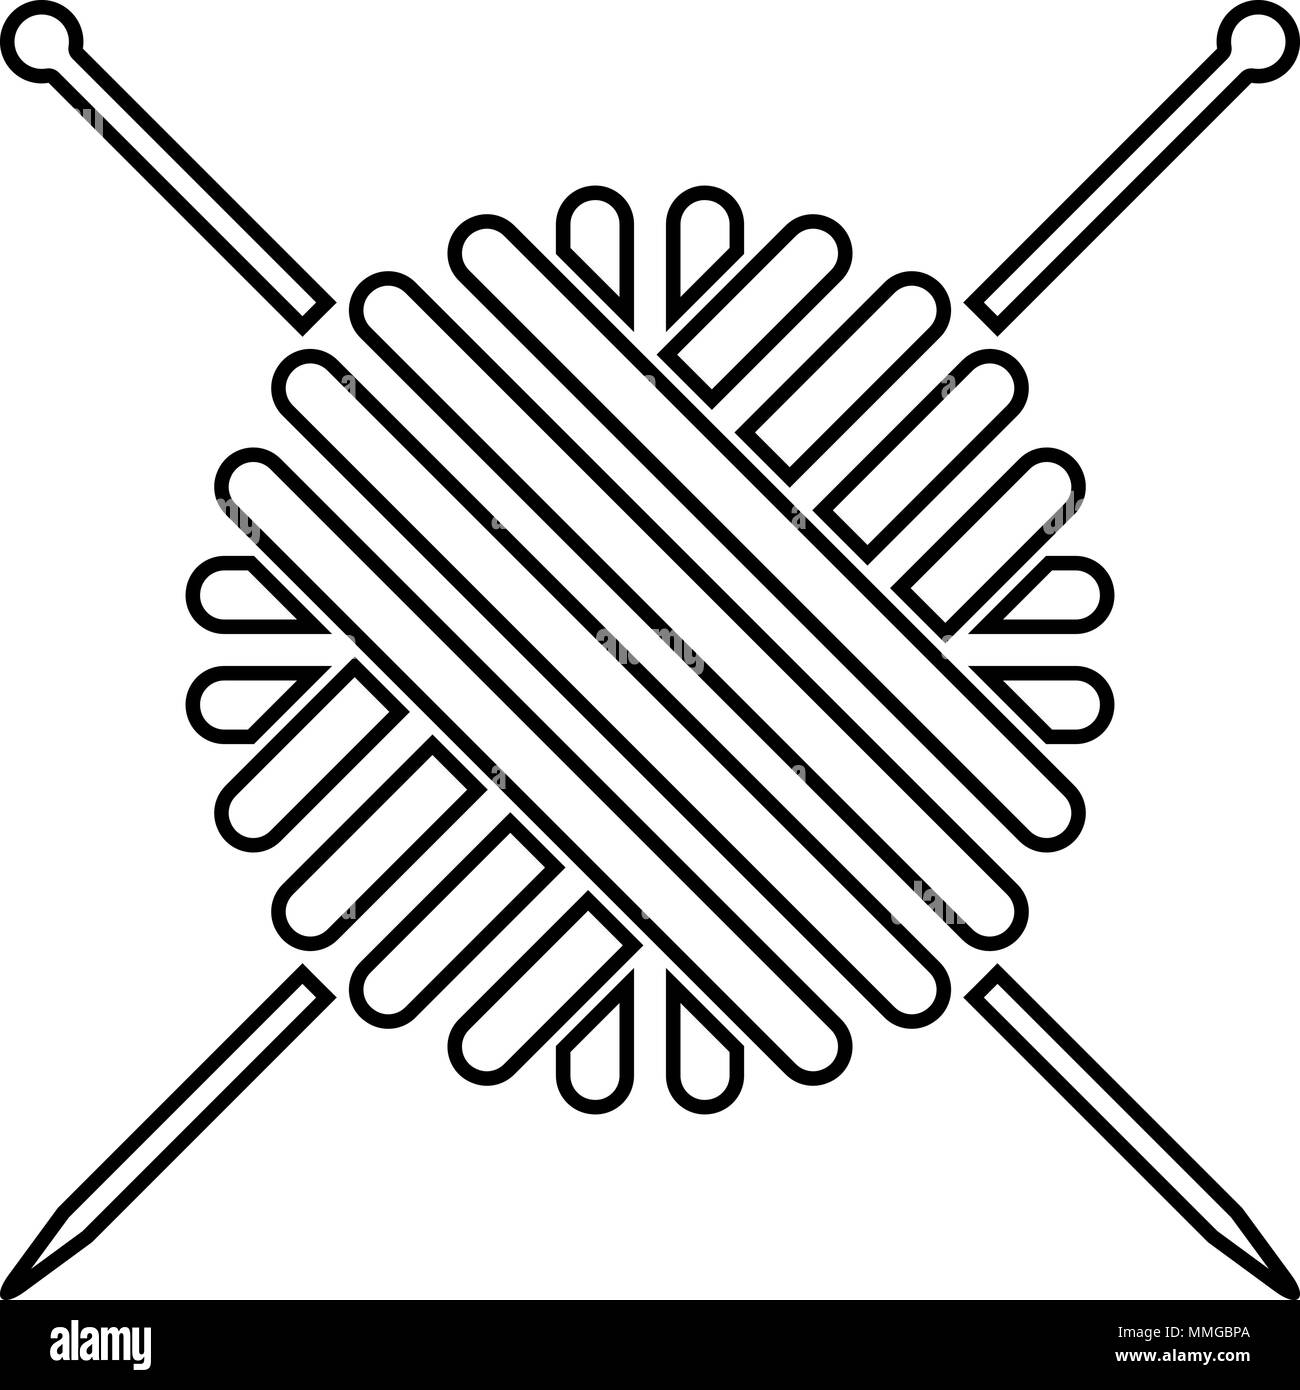 Ball Of Wool Yarn And Knitting Needles Icon Black Color